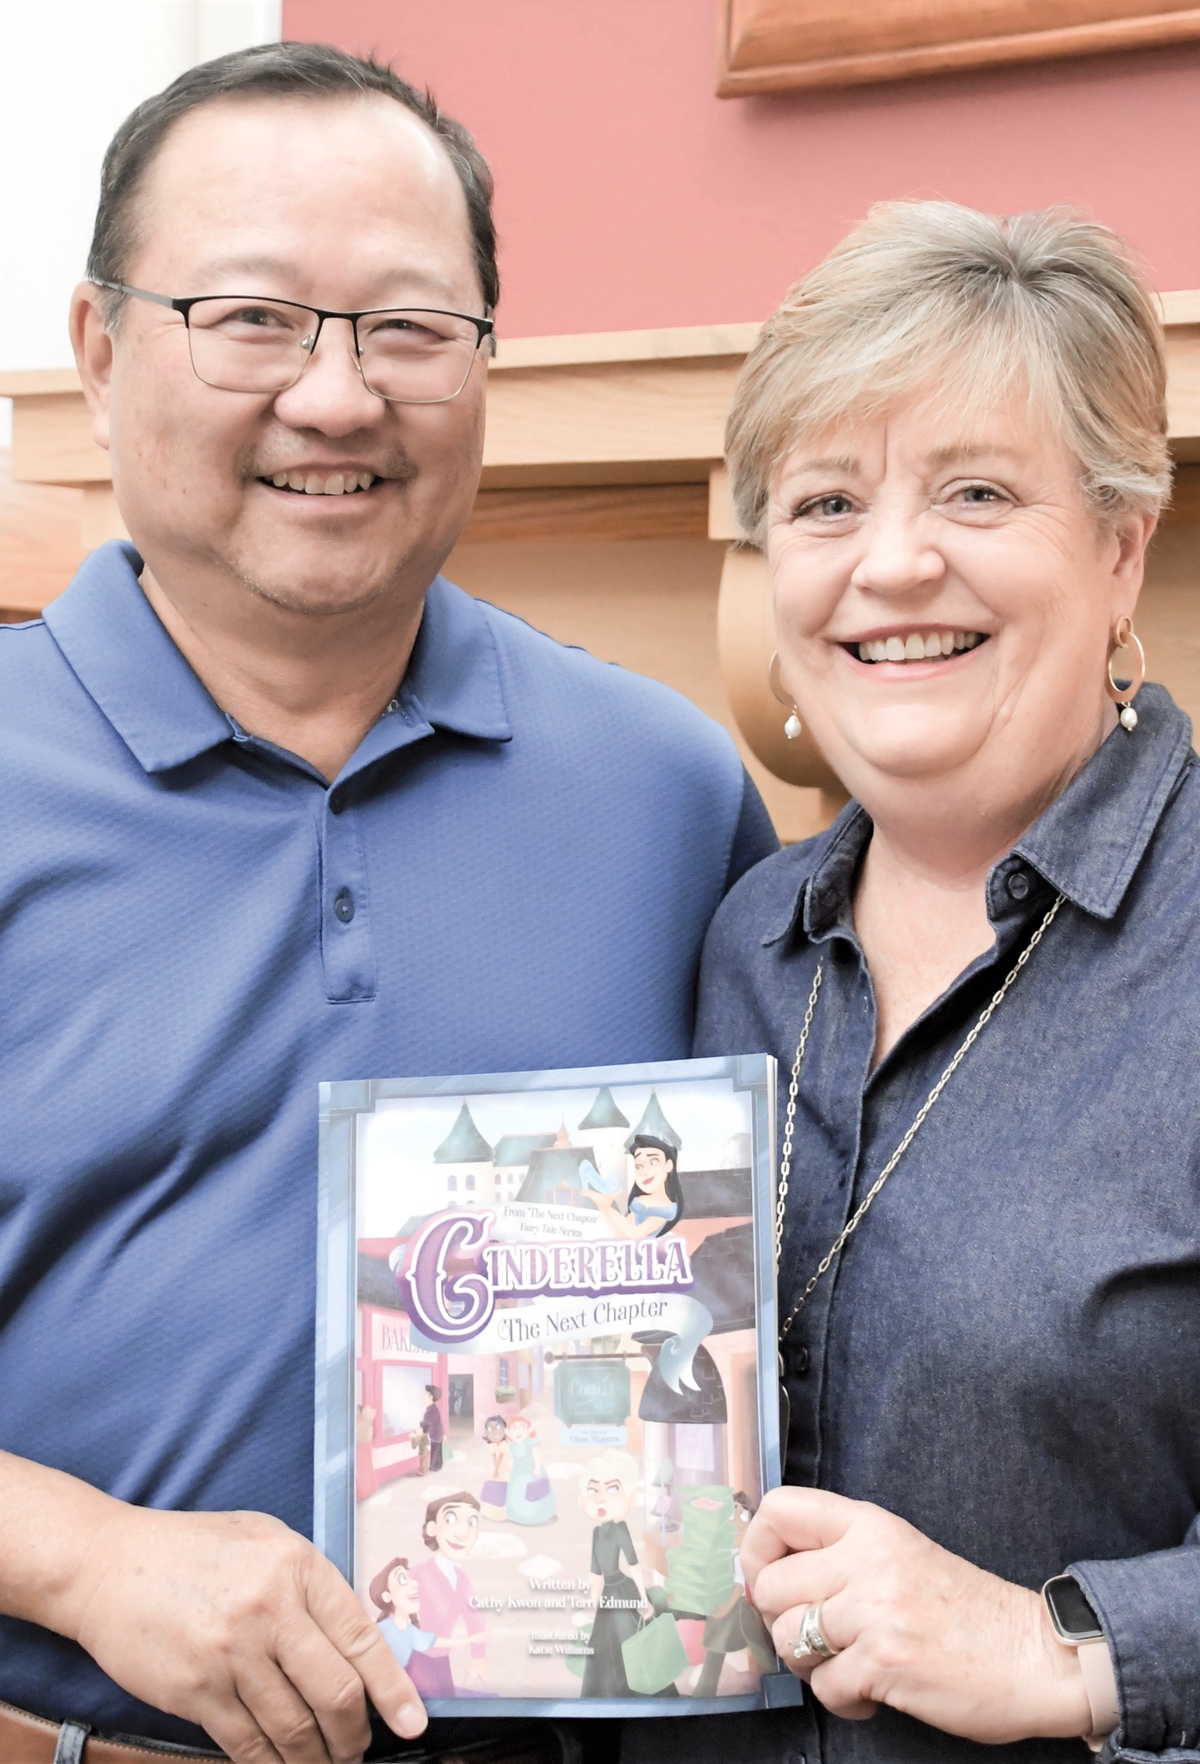 Sun City resident Cathy Kwon continues the story of Cinderella in her new book Cinderella the Next Chapter. She’s shown here with her husband Mike. (Photo by Christine Such/My Sun Day News)